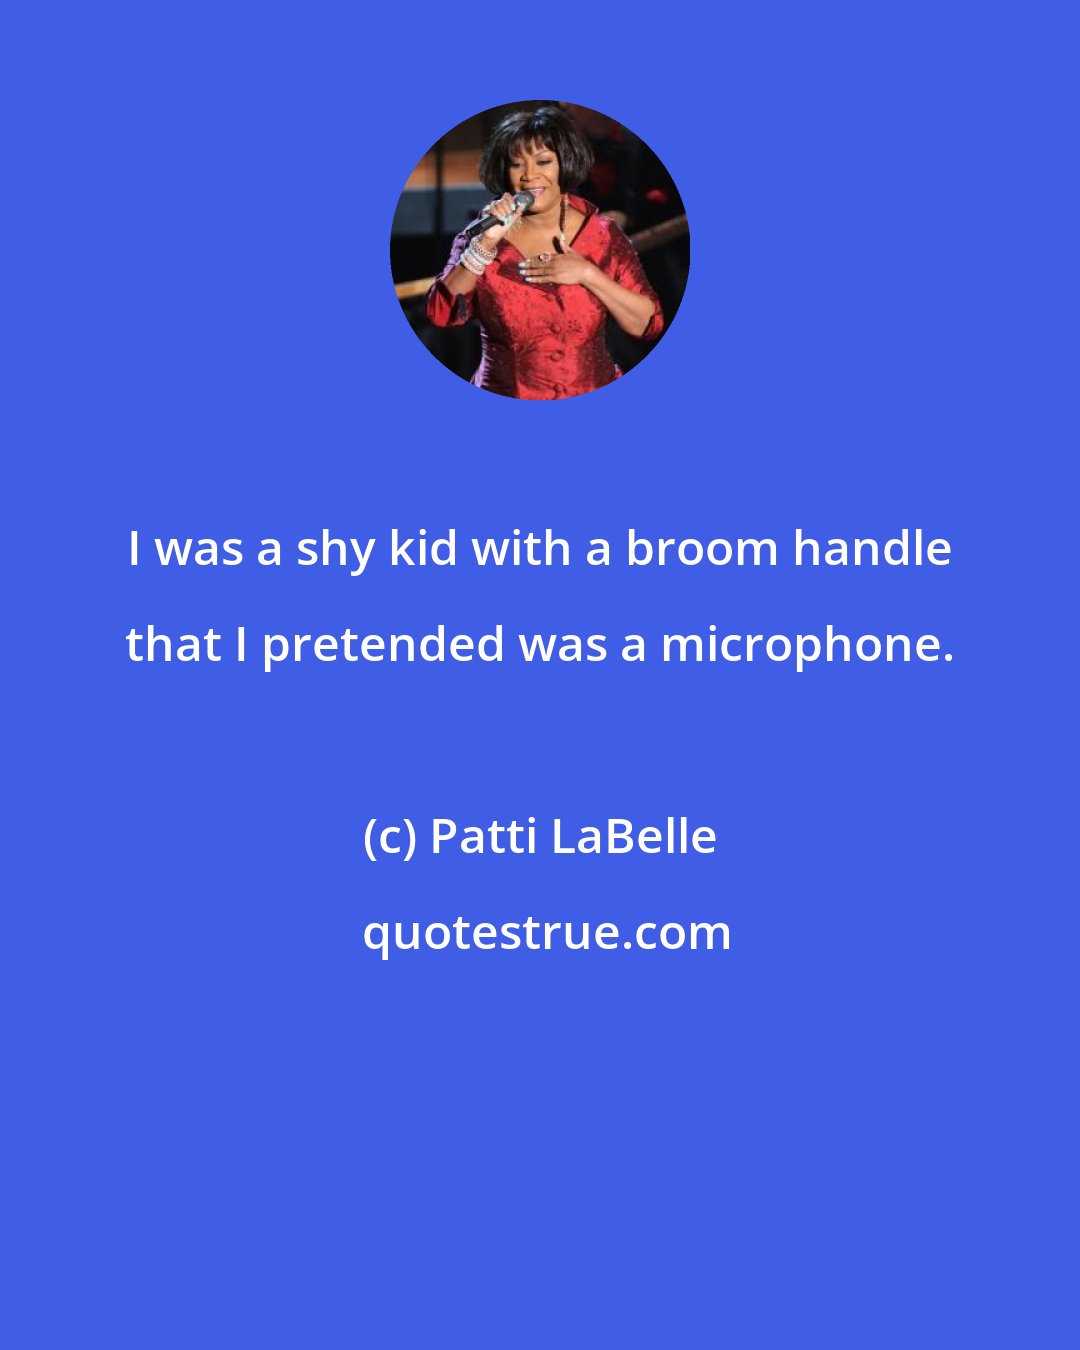 Patti LaBelle: I was a shy kid with a broom handle that I pretended was a microphone.